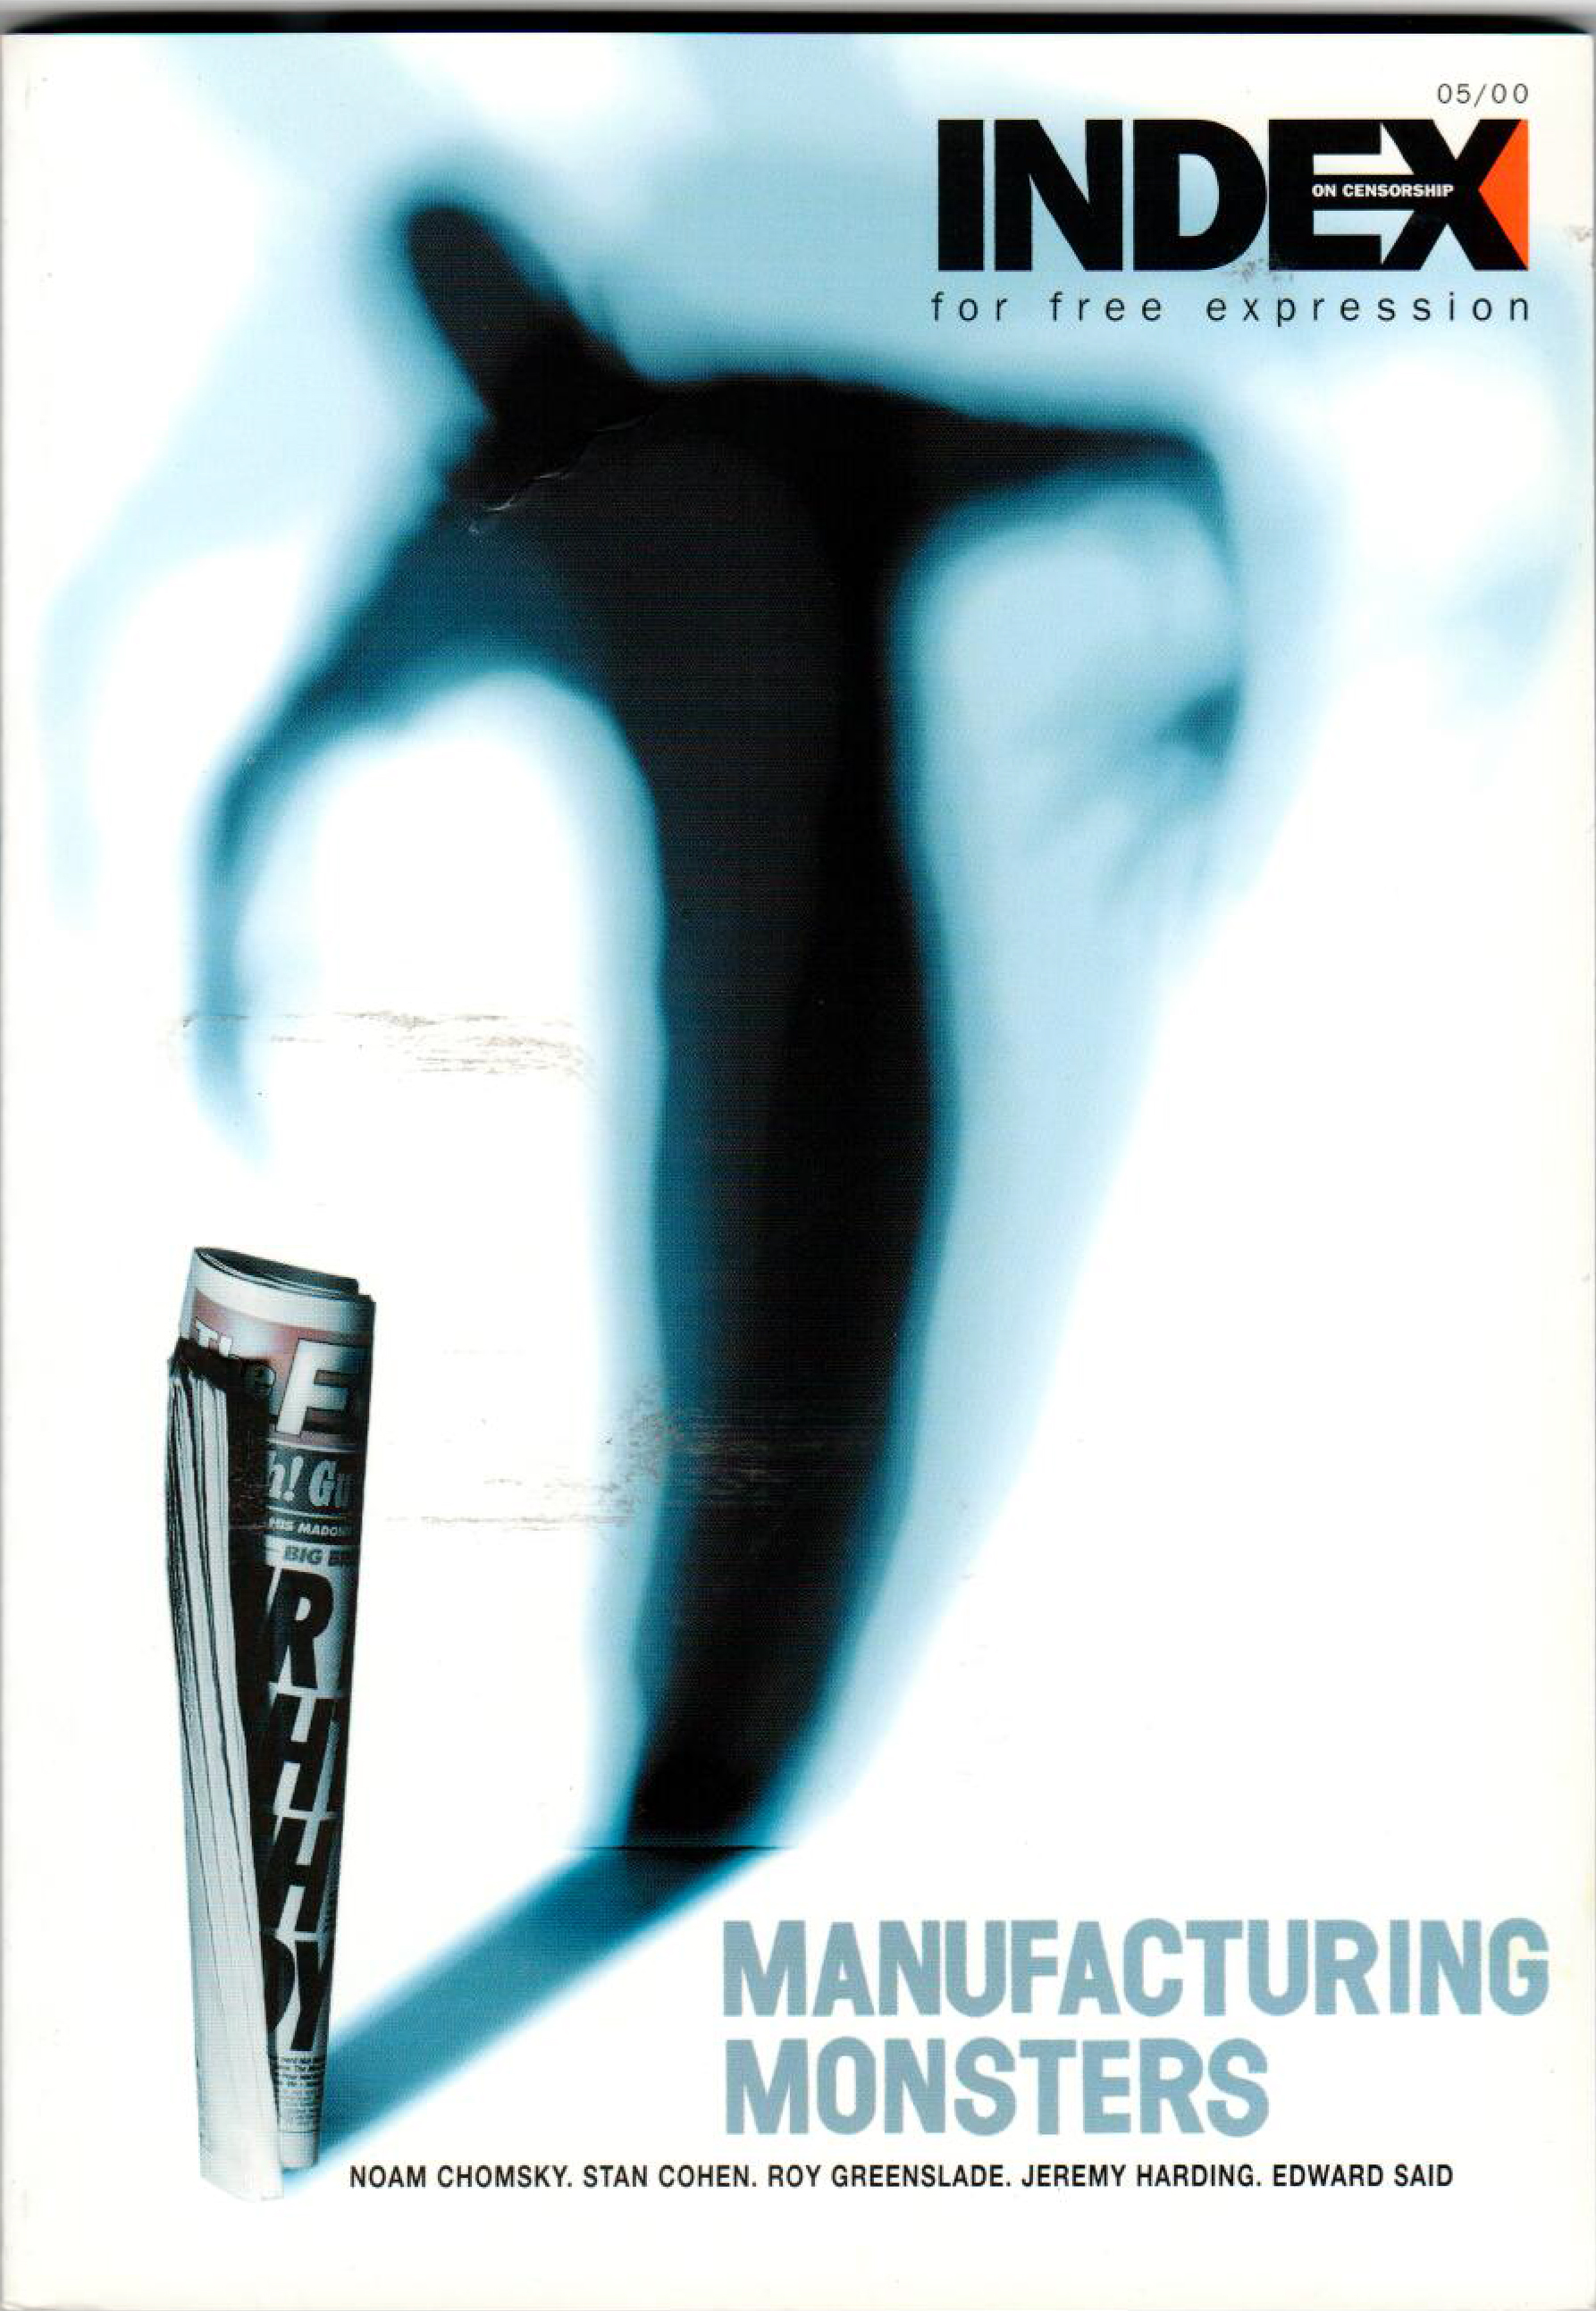 Manufacturing monsters, the September 2000 issue of Index on Censorship magazine.